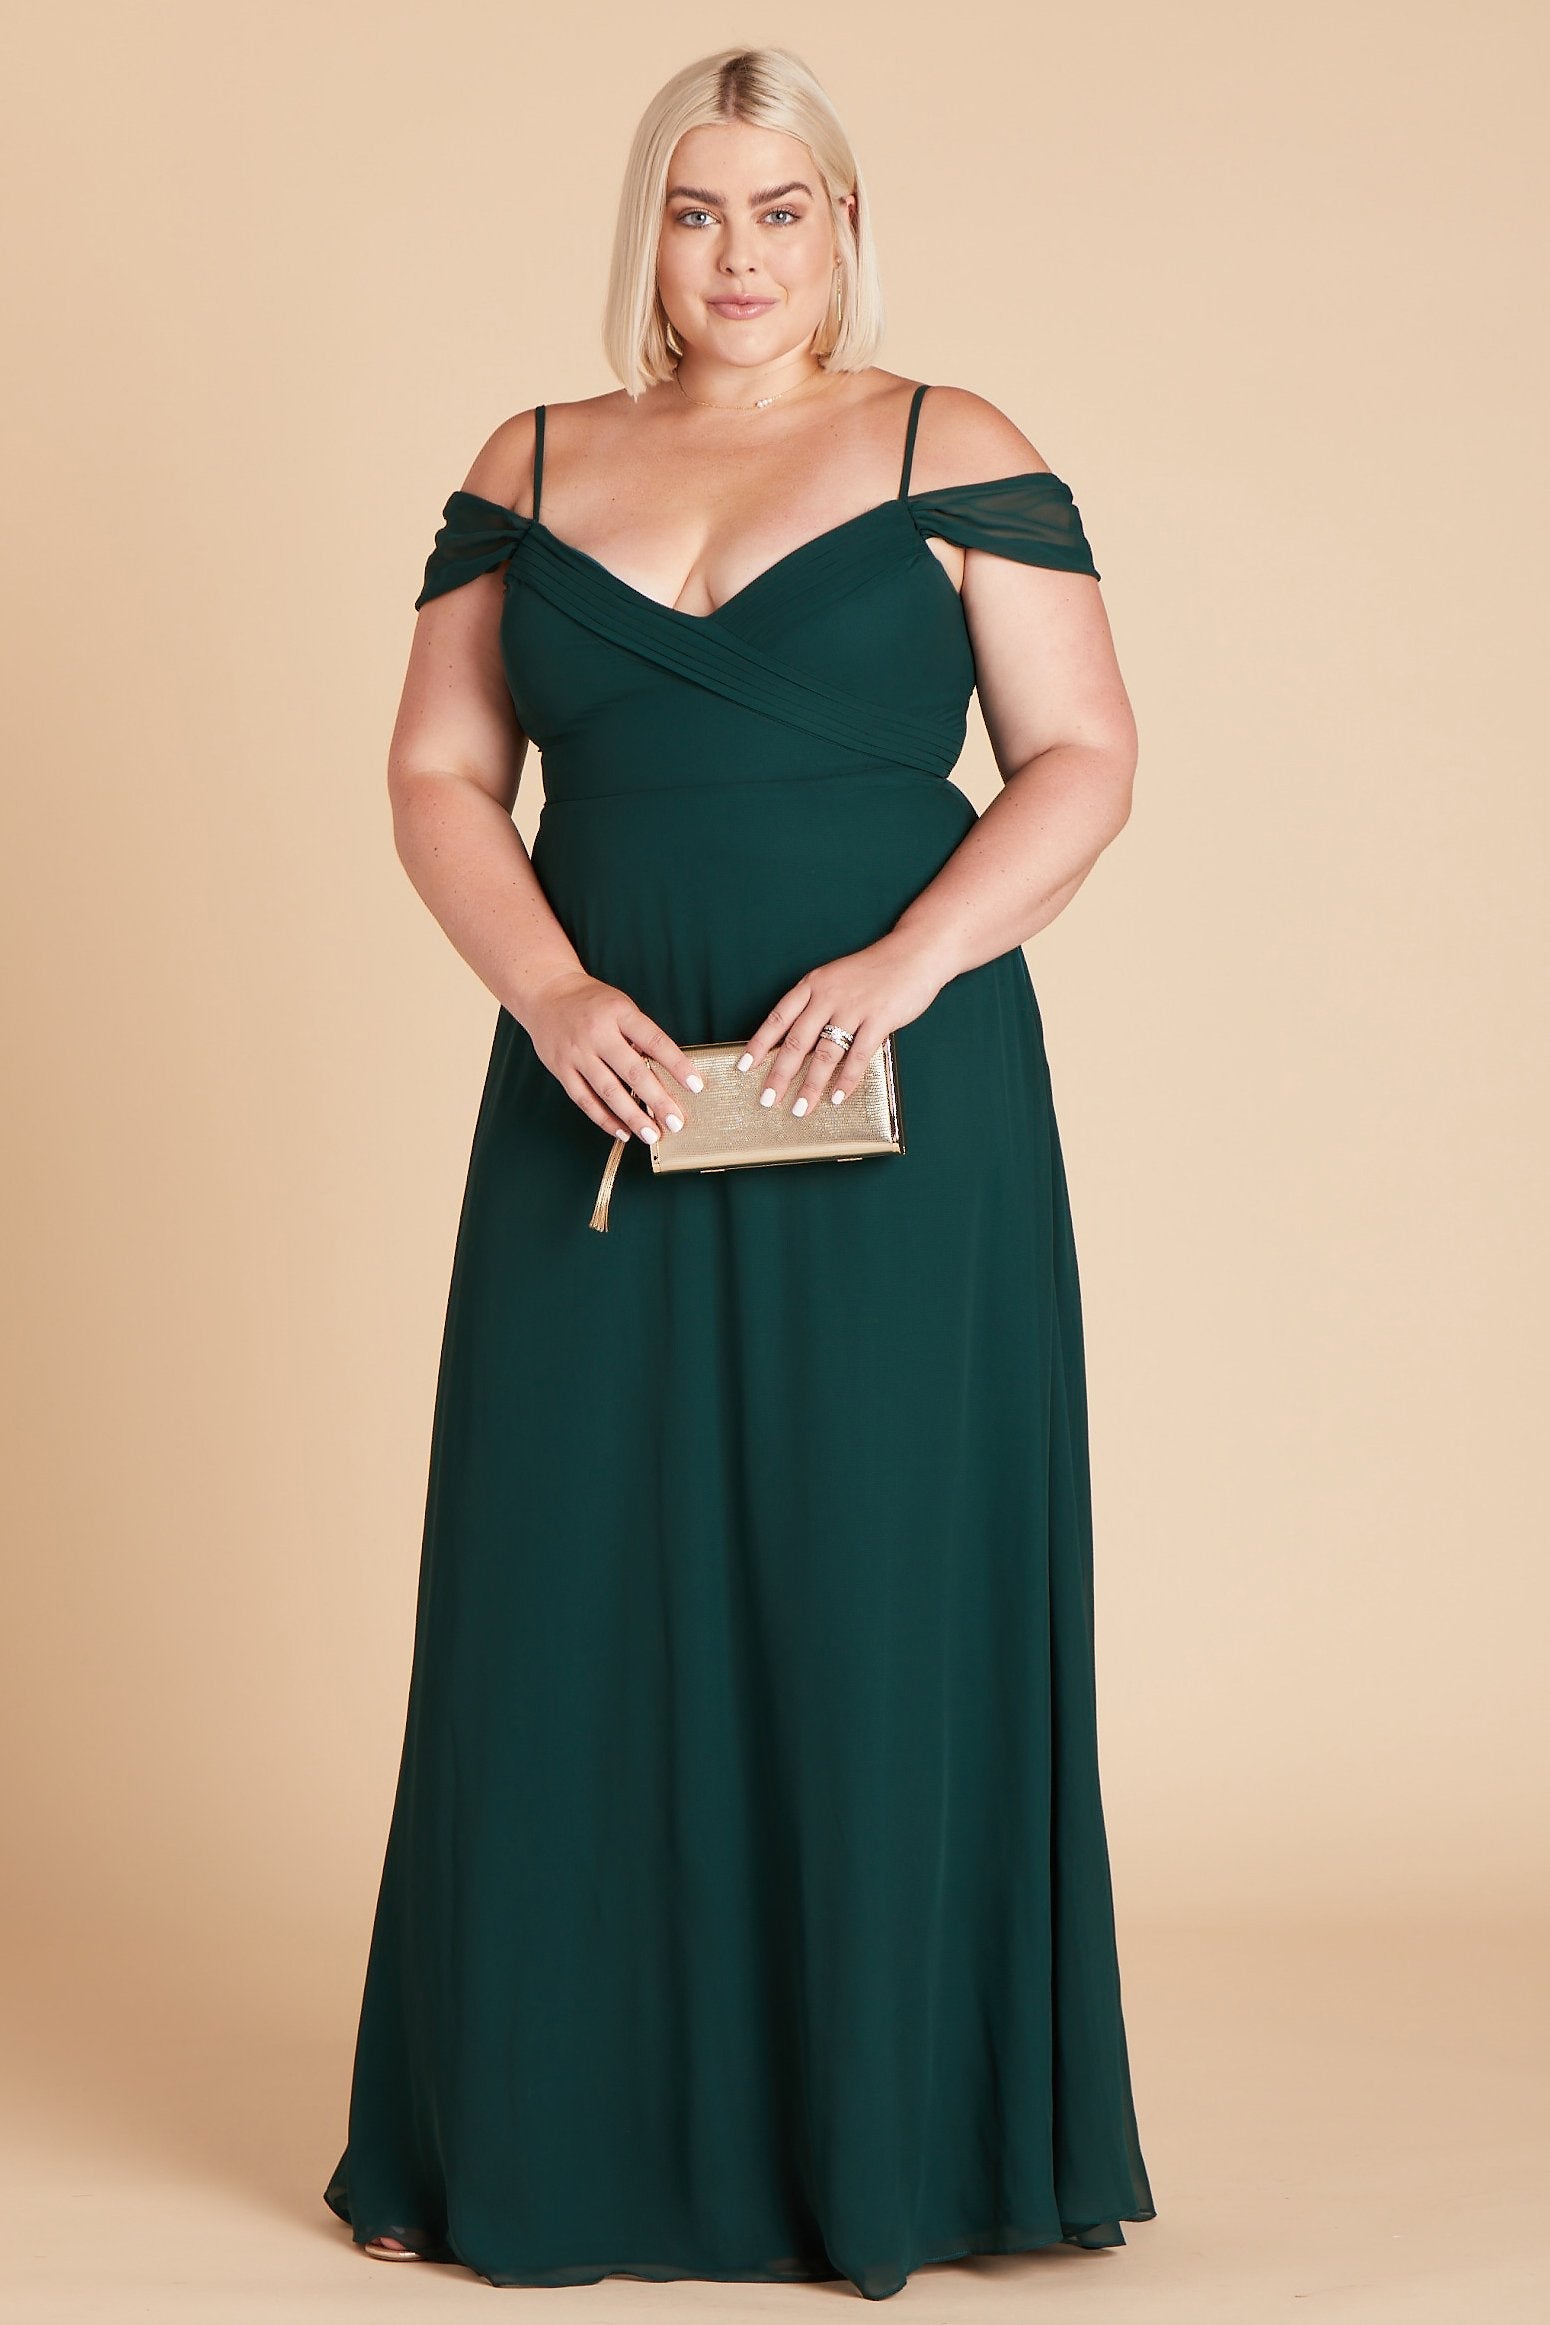 Spence convertible plus size bridesmaid dress in emerald green chiffon by Birdy Grey, front view